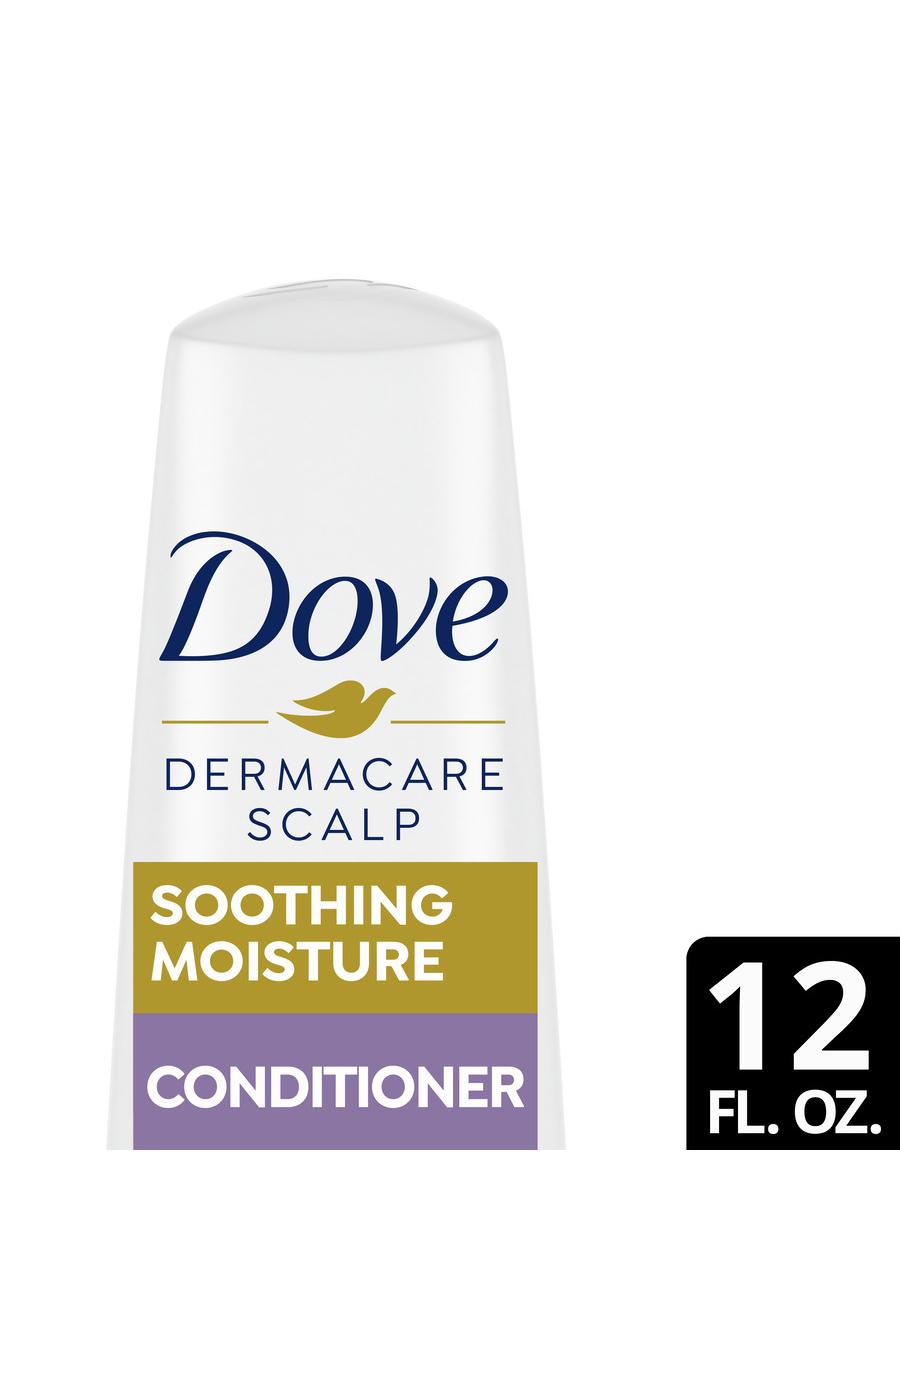 Dove Dermacare Scalp Anti-Dandruff Conditioner - Soothing Moisture; image 2 of 4